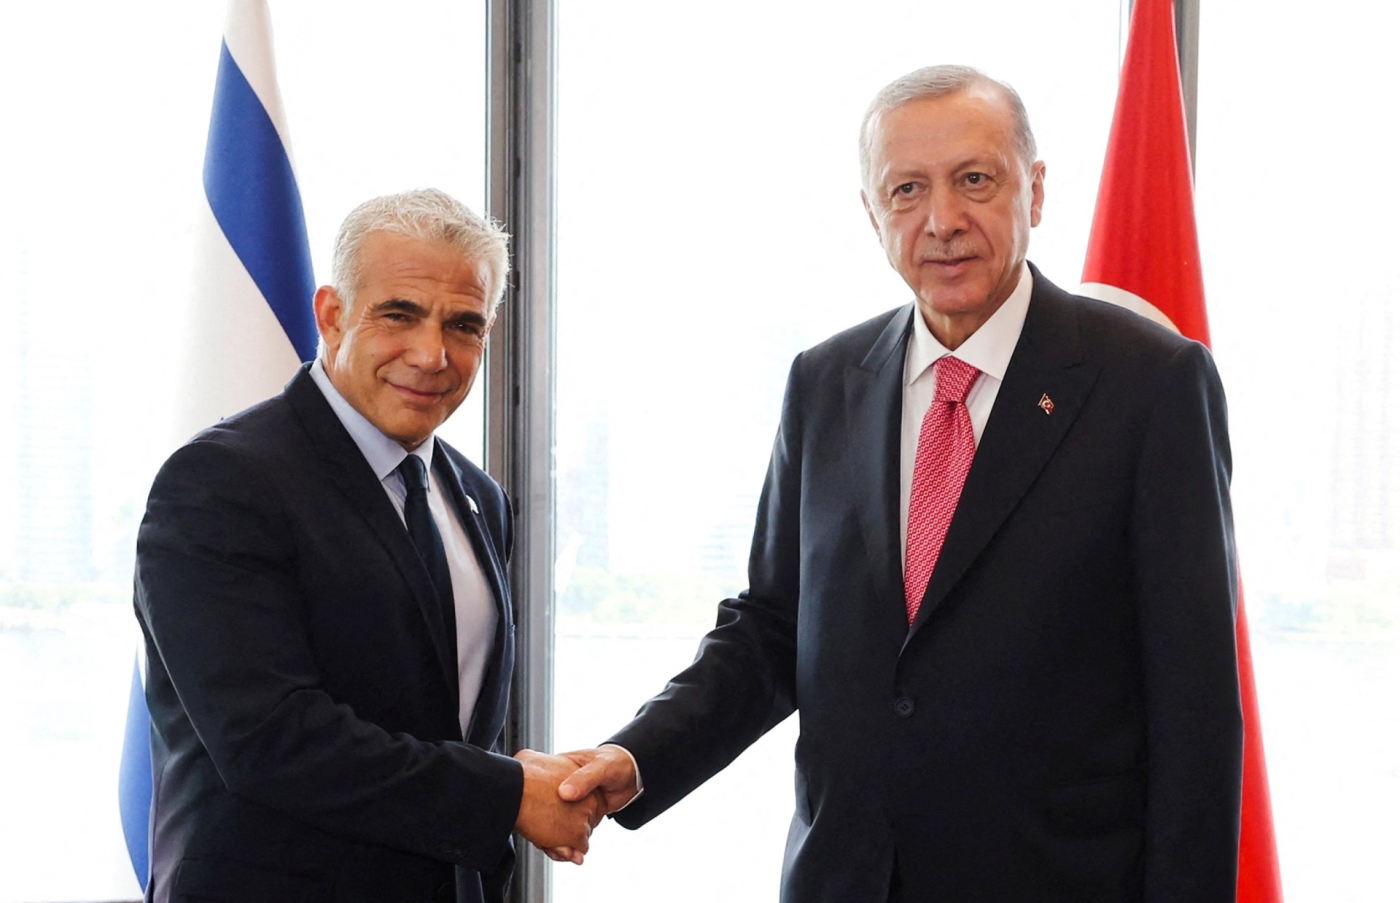 Turkish President Tayyip Erdogan meets with Israeli Prime Minister Yair Lapid on the sidelines of the UN General Assembly in New York City, US, on 20 September 2022 (Reuters/Presidential Press Office)